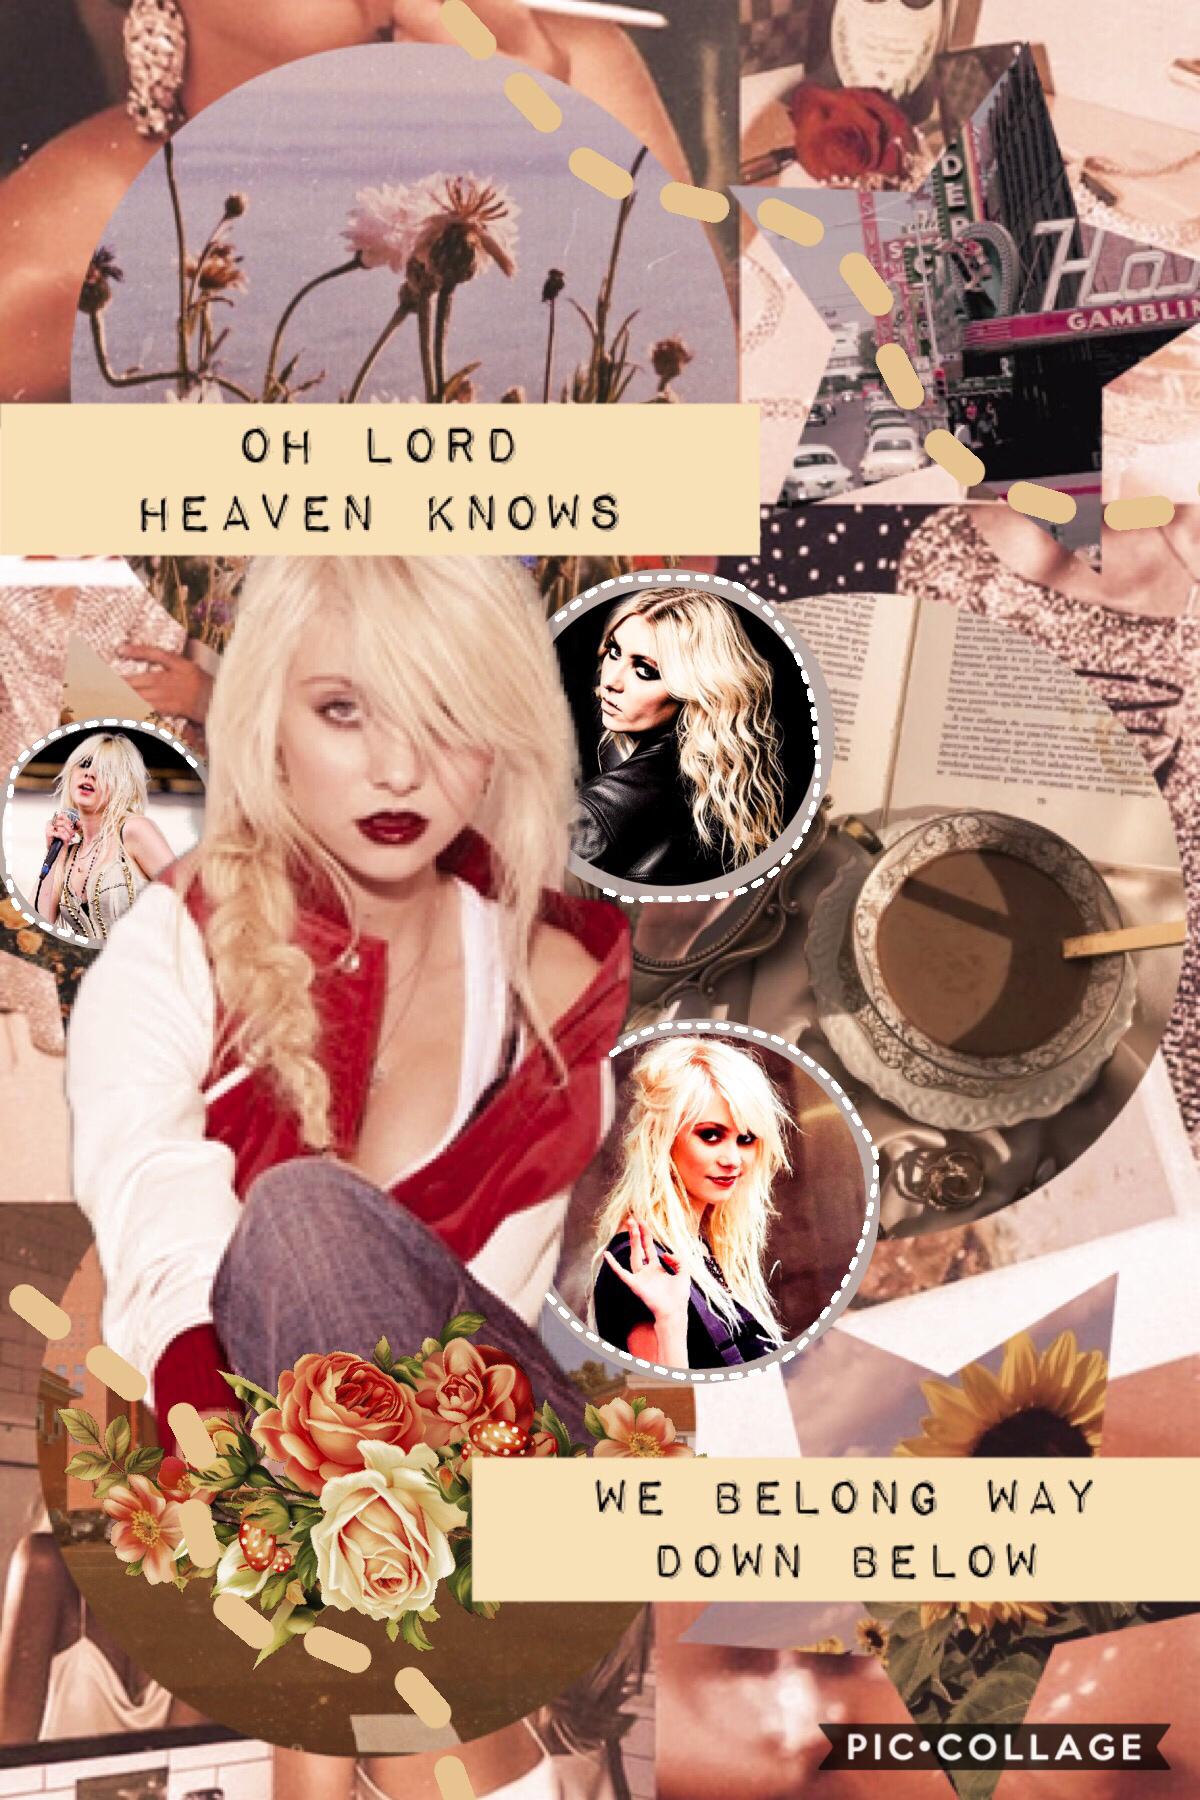 been a wee bit since i posted an actual collage so here ya go. I love Taylor Momsen. I saw a video of her avoiding paparazzi and daaayum she be spider woman